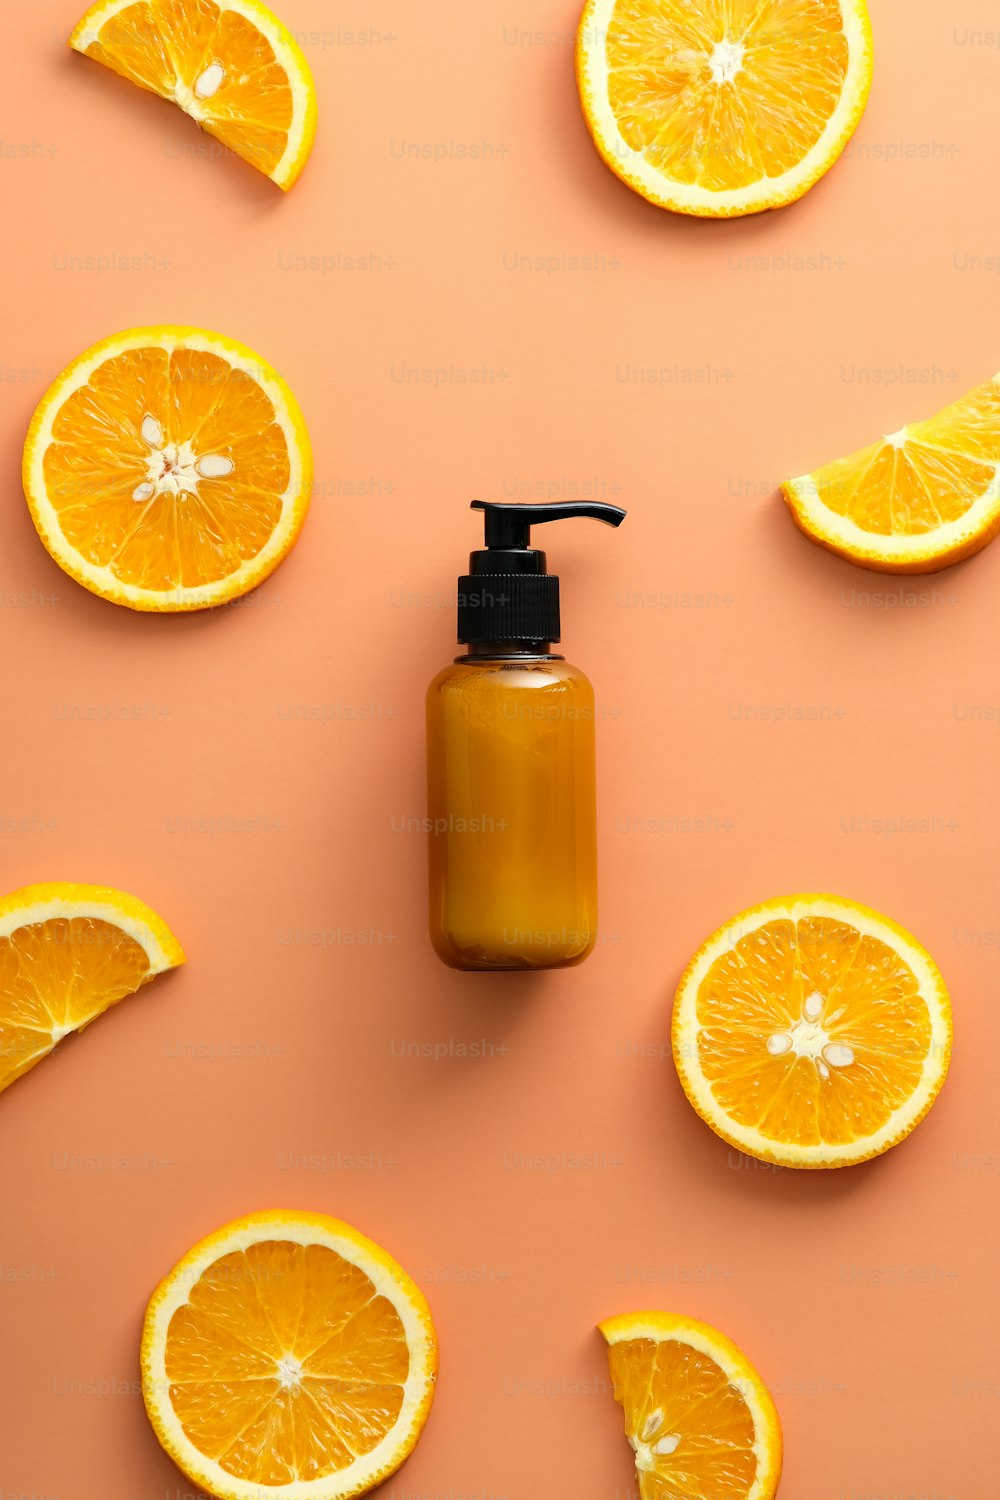 Vitamin C cosmetic lotion pump bottle and orange slices on color background. Citrus beauty product design.